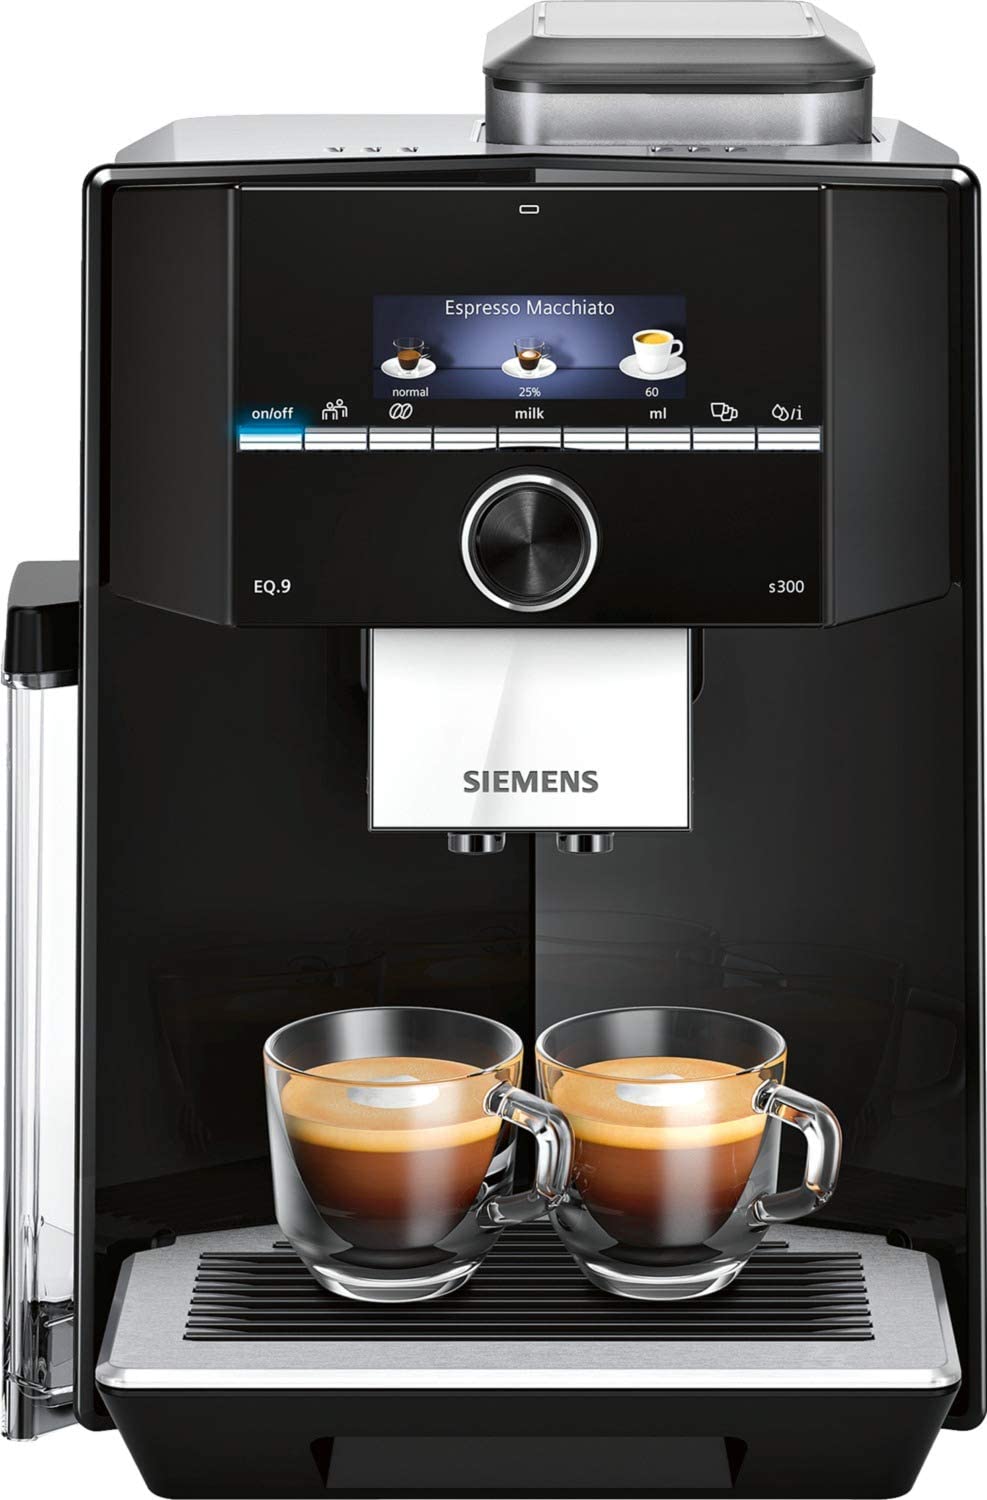 Siemens EQ.9 – Fully Automatic Coffee Machine with Touch Screen – Allows You to Prepare Two Cups at the Same Time – iAroma System and Aroma DoubleShot